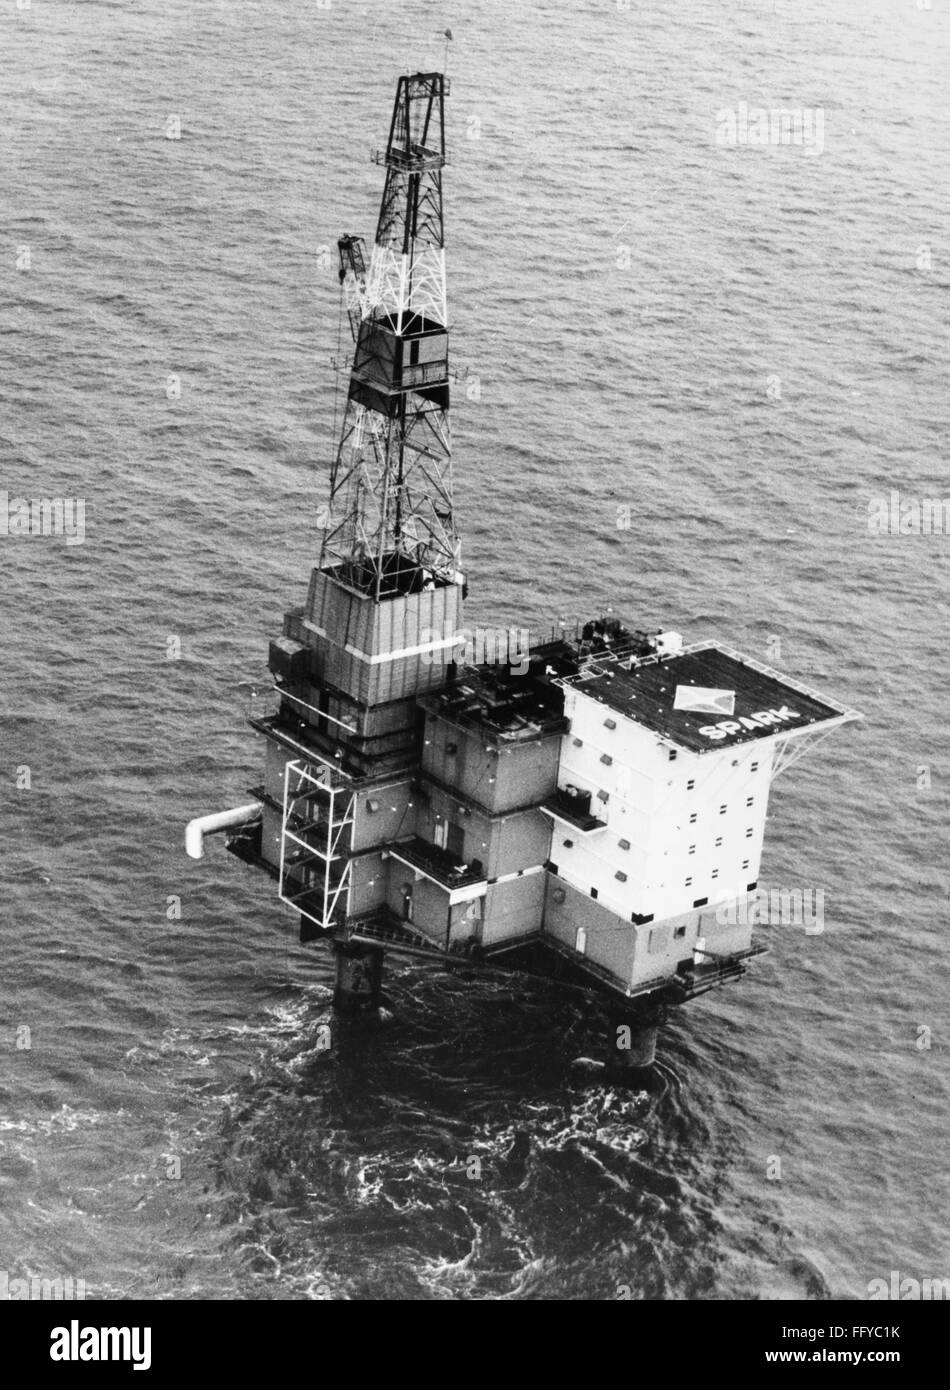 ALASKA: OIL RIG, 1968. /nAerial view of Platform Spark, an offshore oil platform in the Trading Bay area of Cook Inlet, on Alaska's southern coast. Photographed in 1968, when it was operated by the Atlantic Richfield Company. Stock Photo